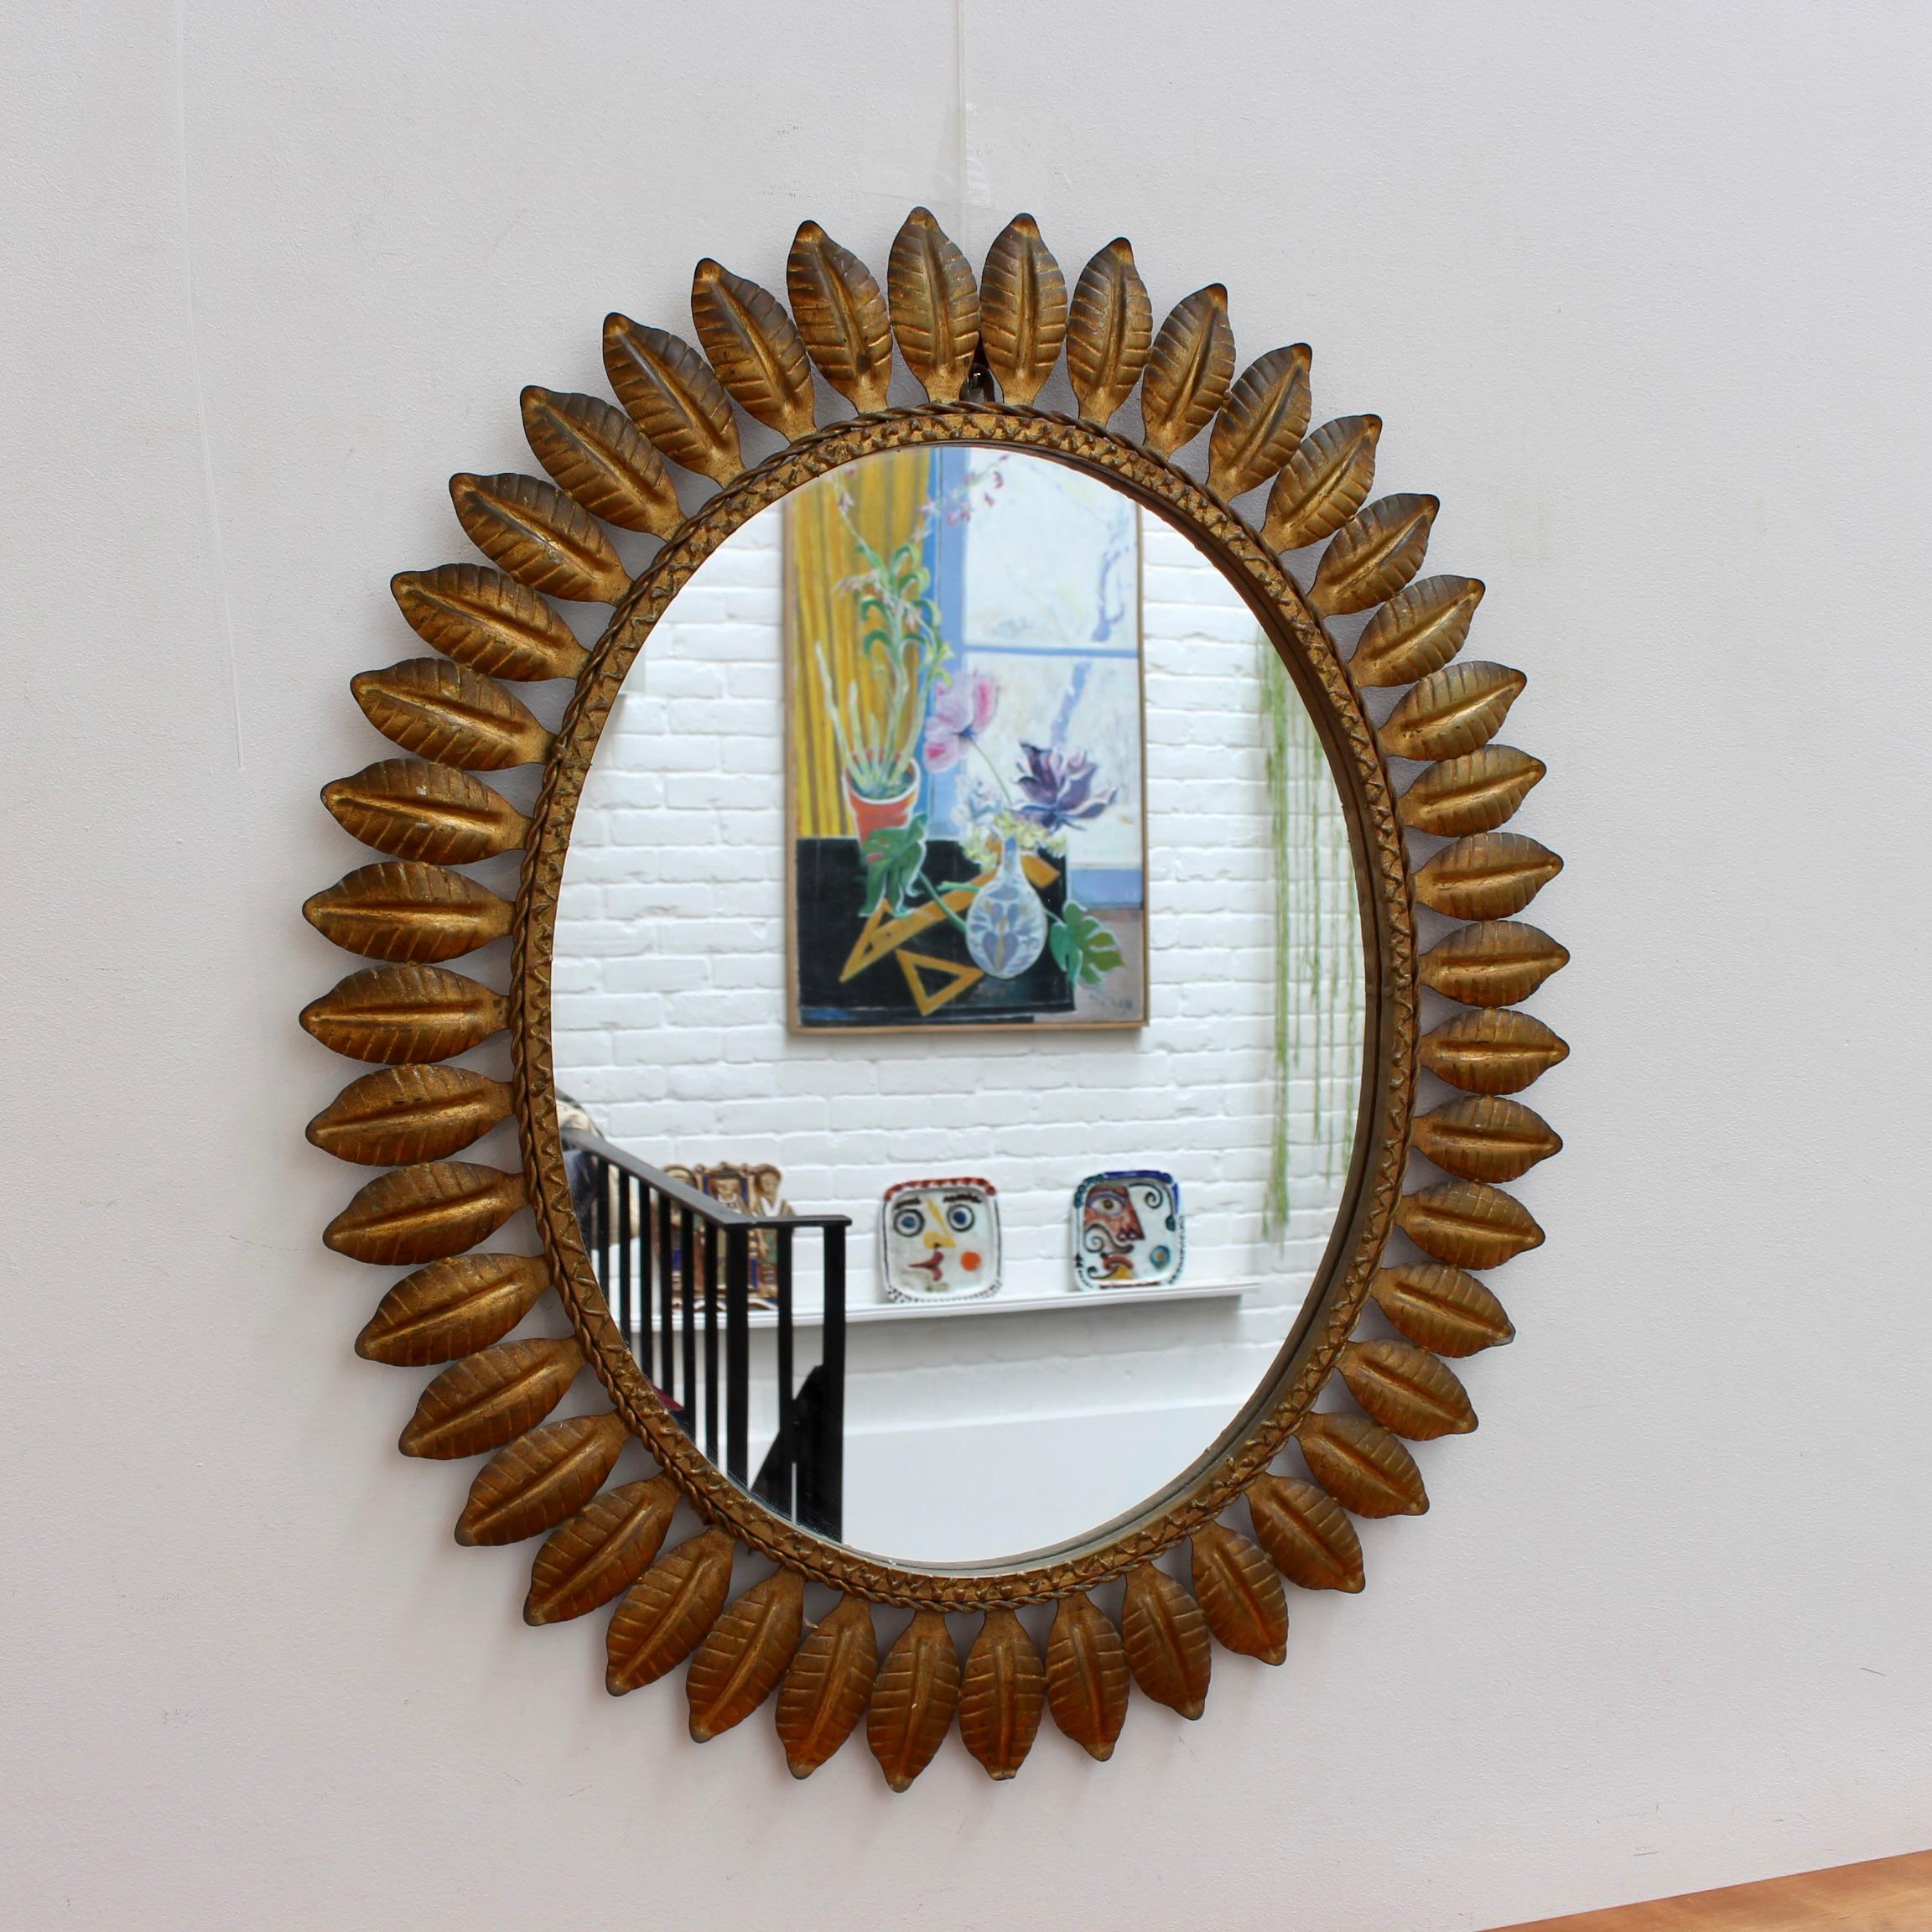 Vintage Spanish tôle sunburst mirror with copper patina and leaf motif rays coupled with a rope-pattern mirror border. In good overall condition. Some minor age-related blemishes appear on the leaf decor and mirror glass reflecting (excuse the pun)